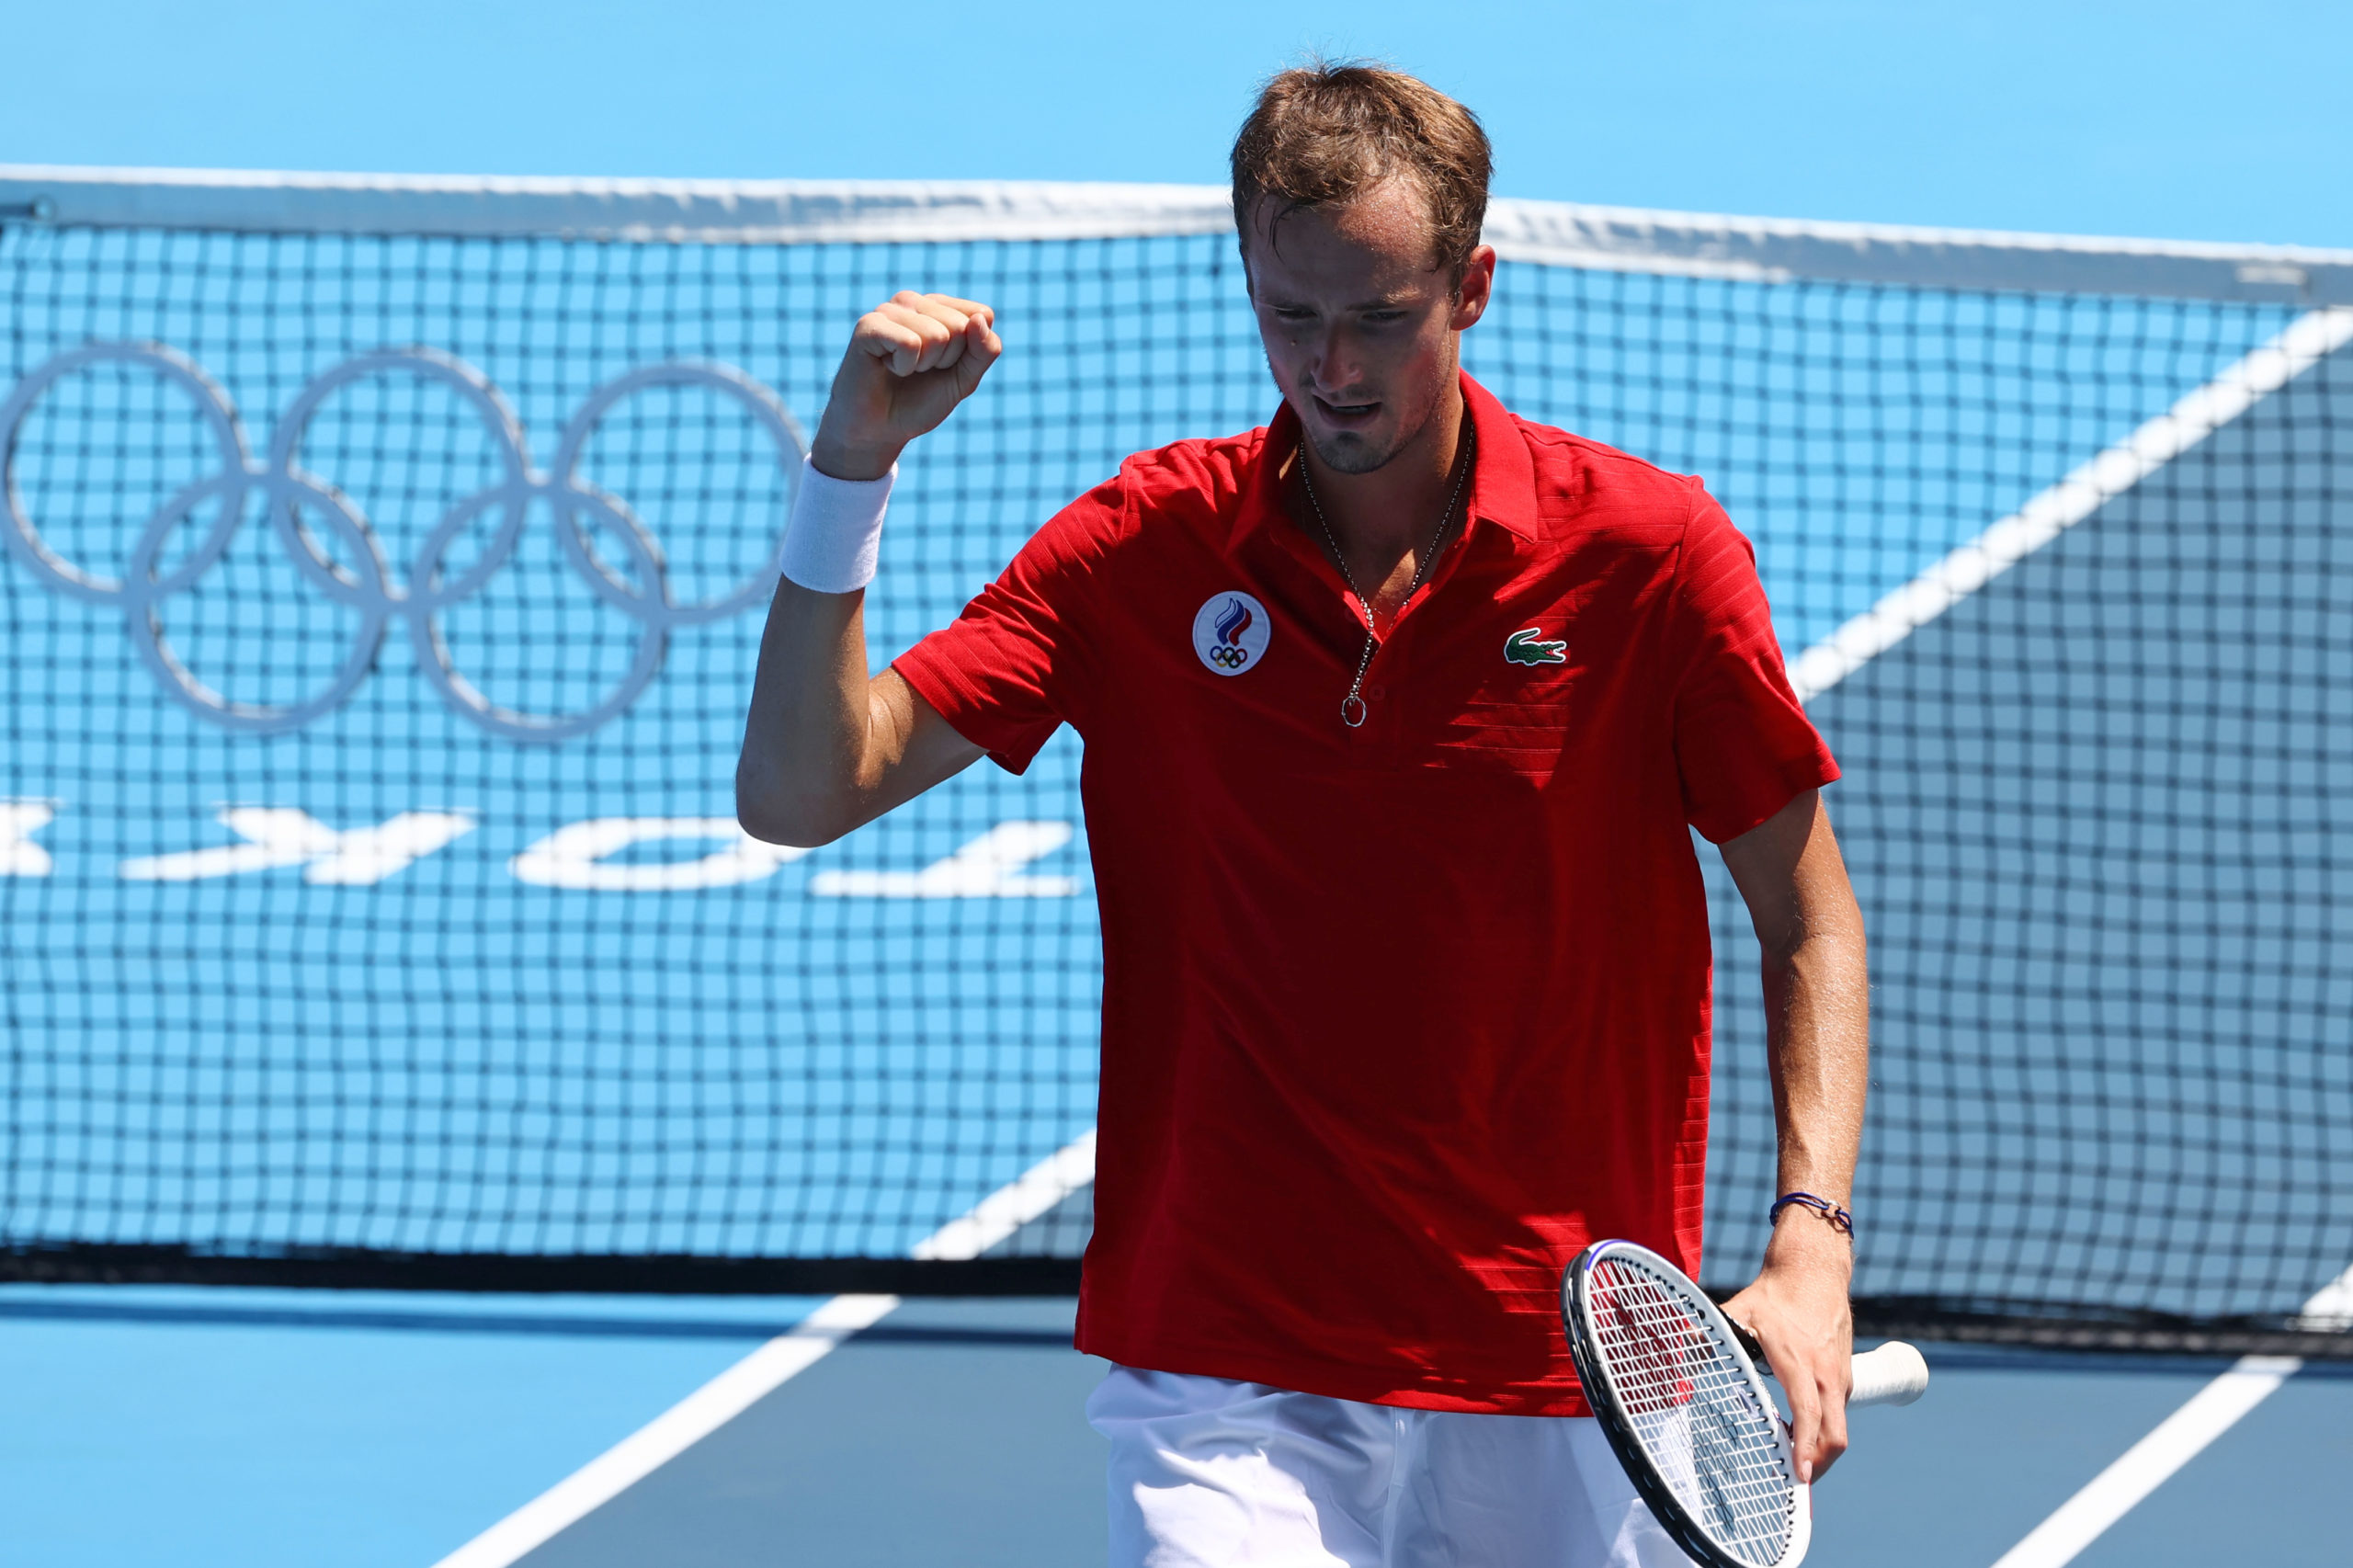 Daniil Medvedev of the Russian Olympic Committee reacts during his third round match against Fabio Fognini of Italy 